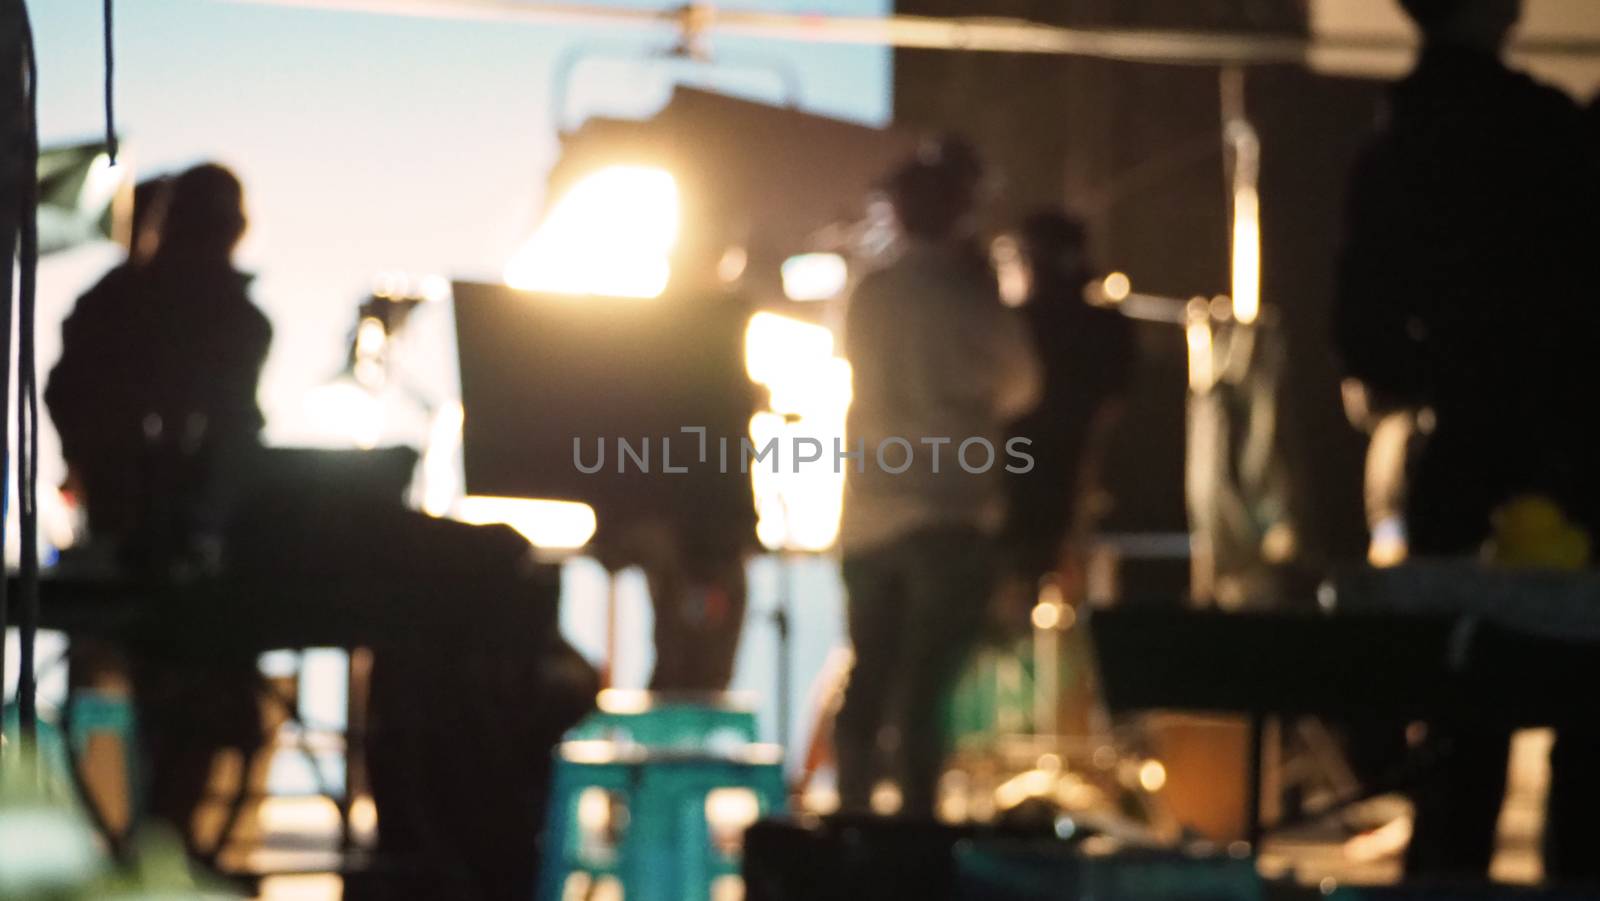 Blurred images of behind the scenes of filming or movie shooting by gnepphoto